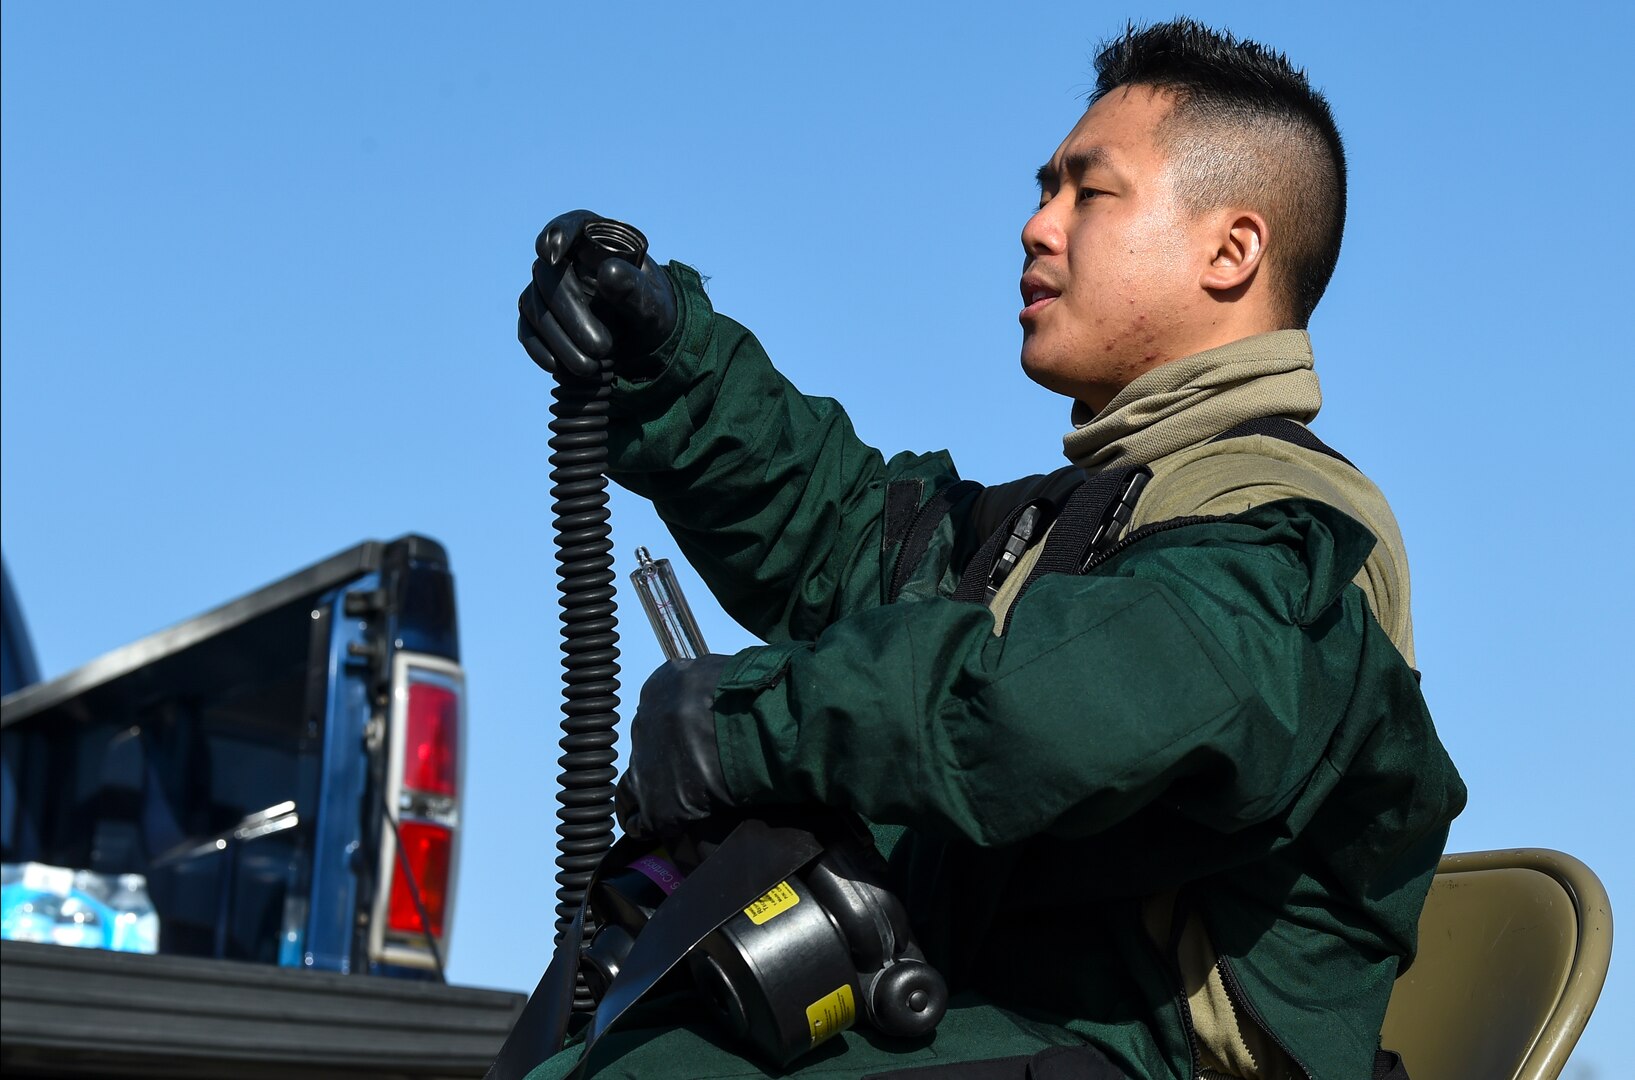 Staff Sgt. Benjamin Le of the 149th Fighter Wing’s fatality search and rescue team assembles his powered air purifying respirator gas mask during a training event Nov. 15 at Joint Base San Antonio-Lackland. The FSRT members were training on how to move into a contaminated area and recover remains after a chemical disaster.